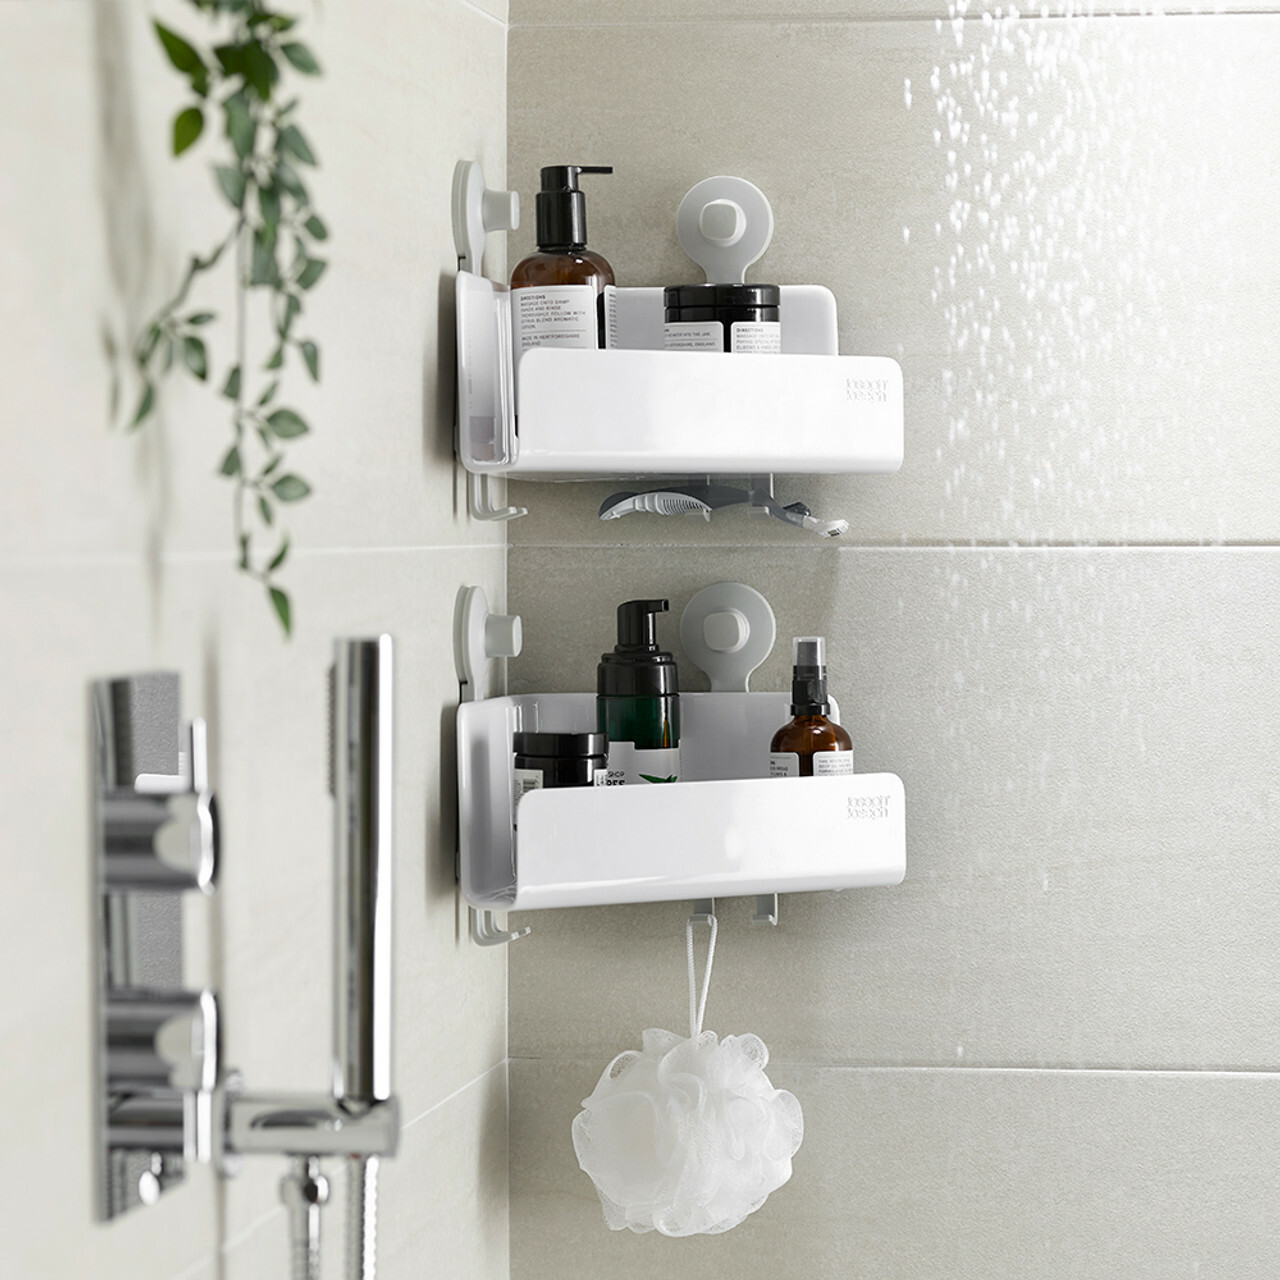 What To Put In Shower Caddy